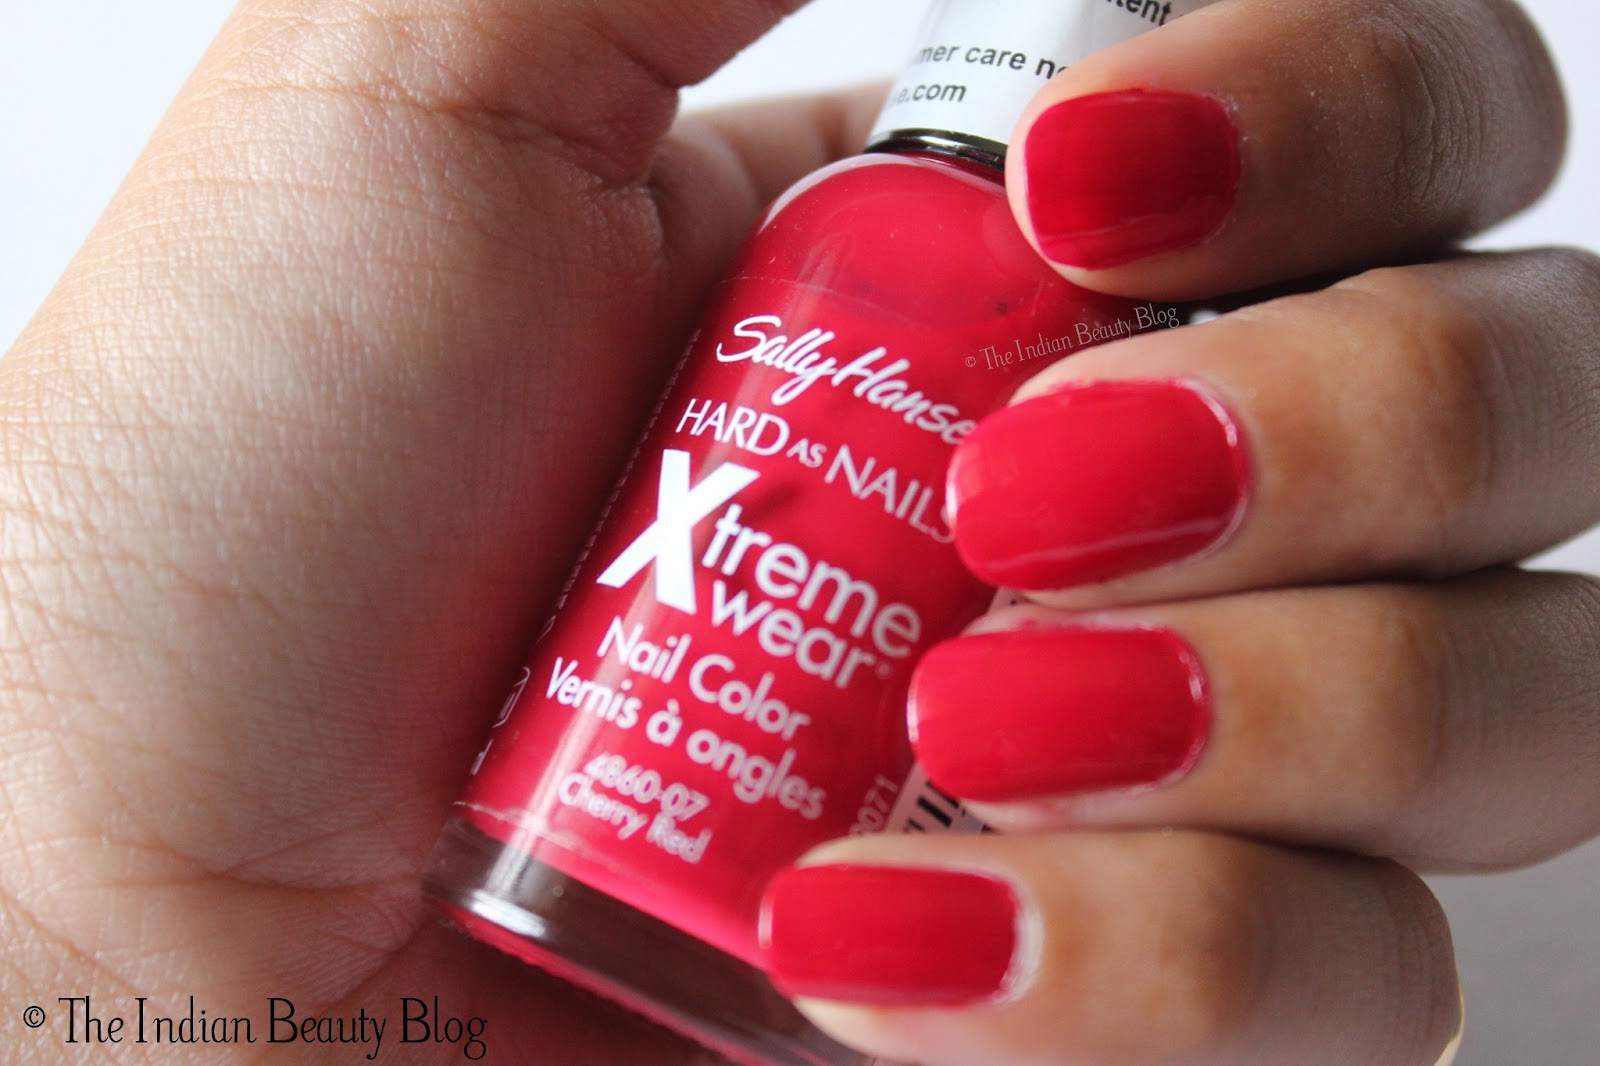 Sally Hansen Hard As Nails Xtreme Wear nail color- Cherry Red: Review, NOTD  - The Indian Beauty Blog